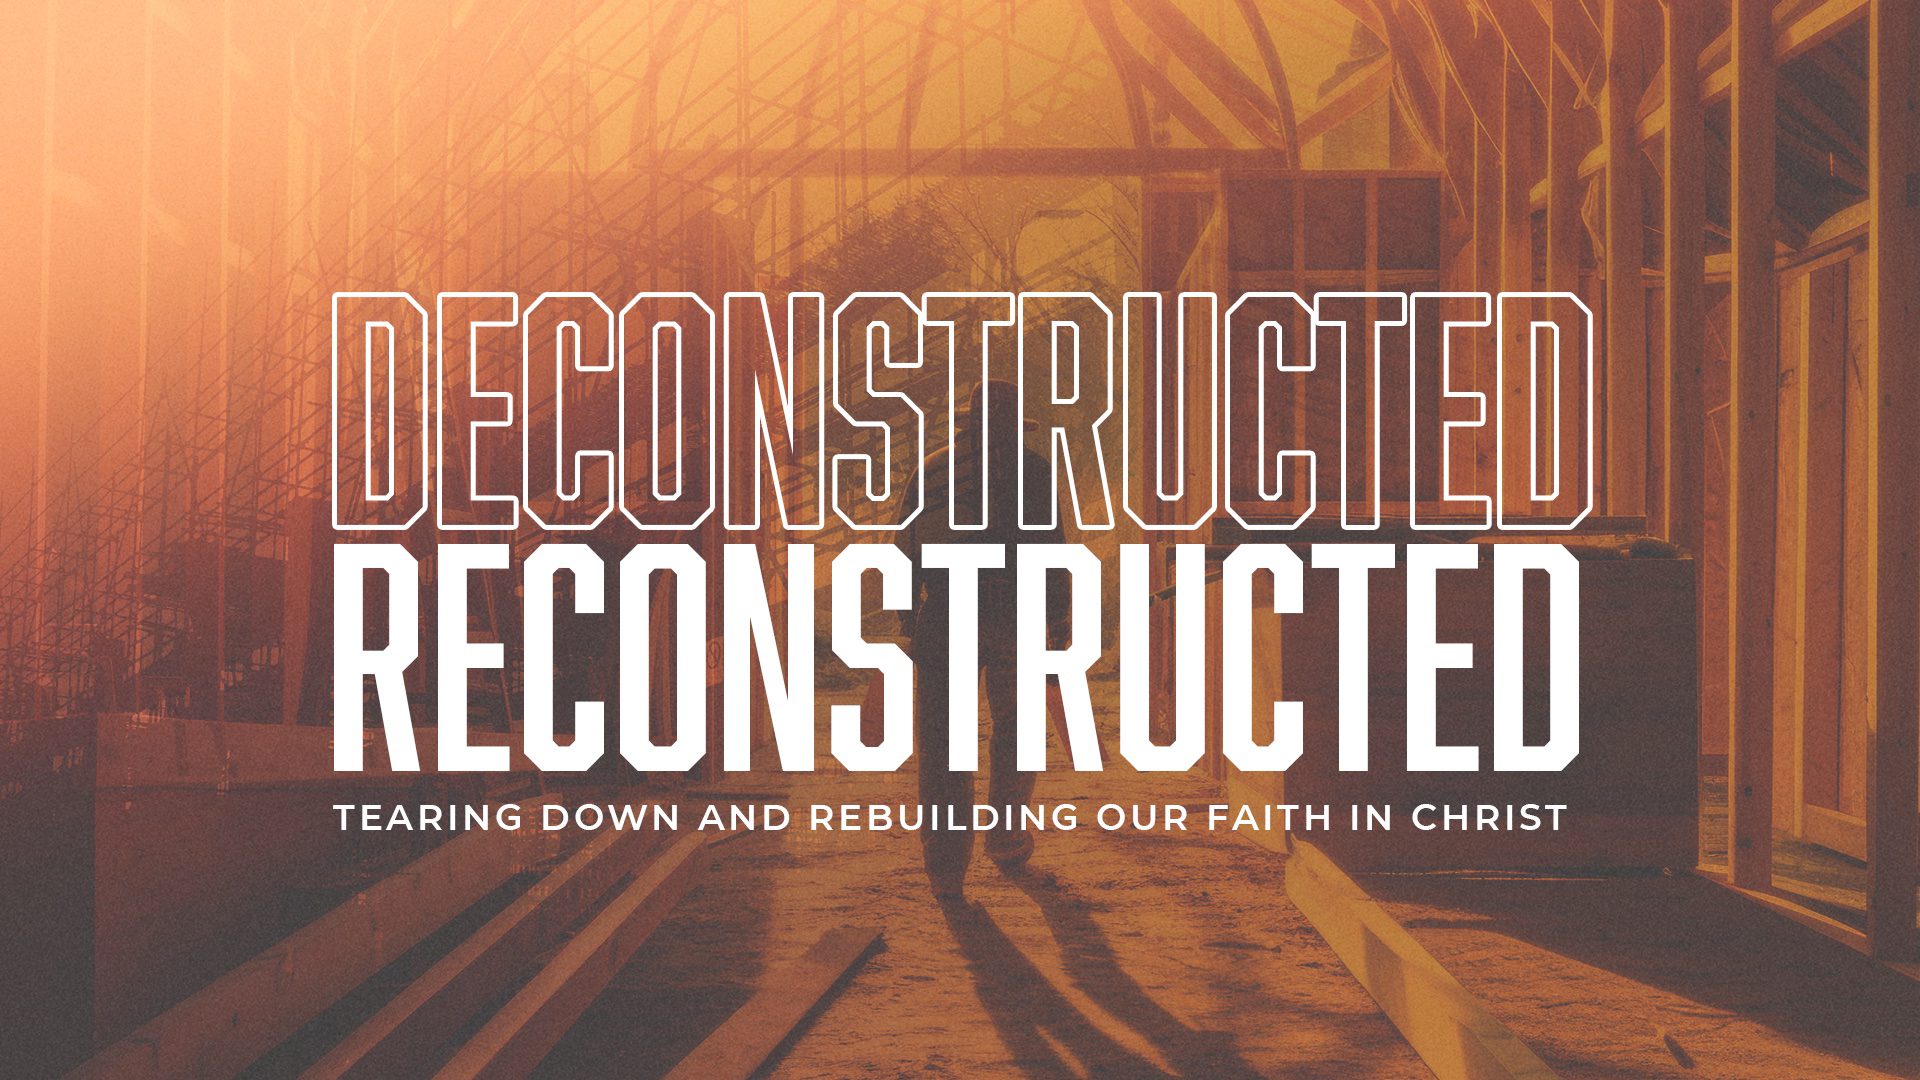 Deconstructed - Reconstructed: Tearing down and rebuilding our faith in Christ